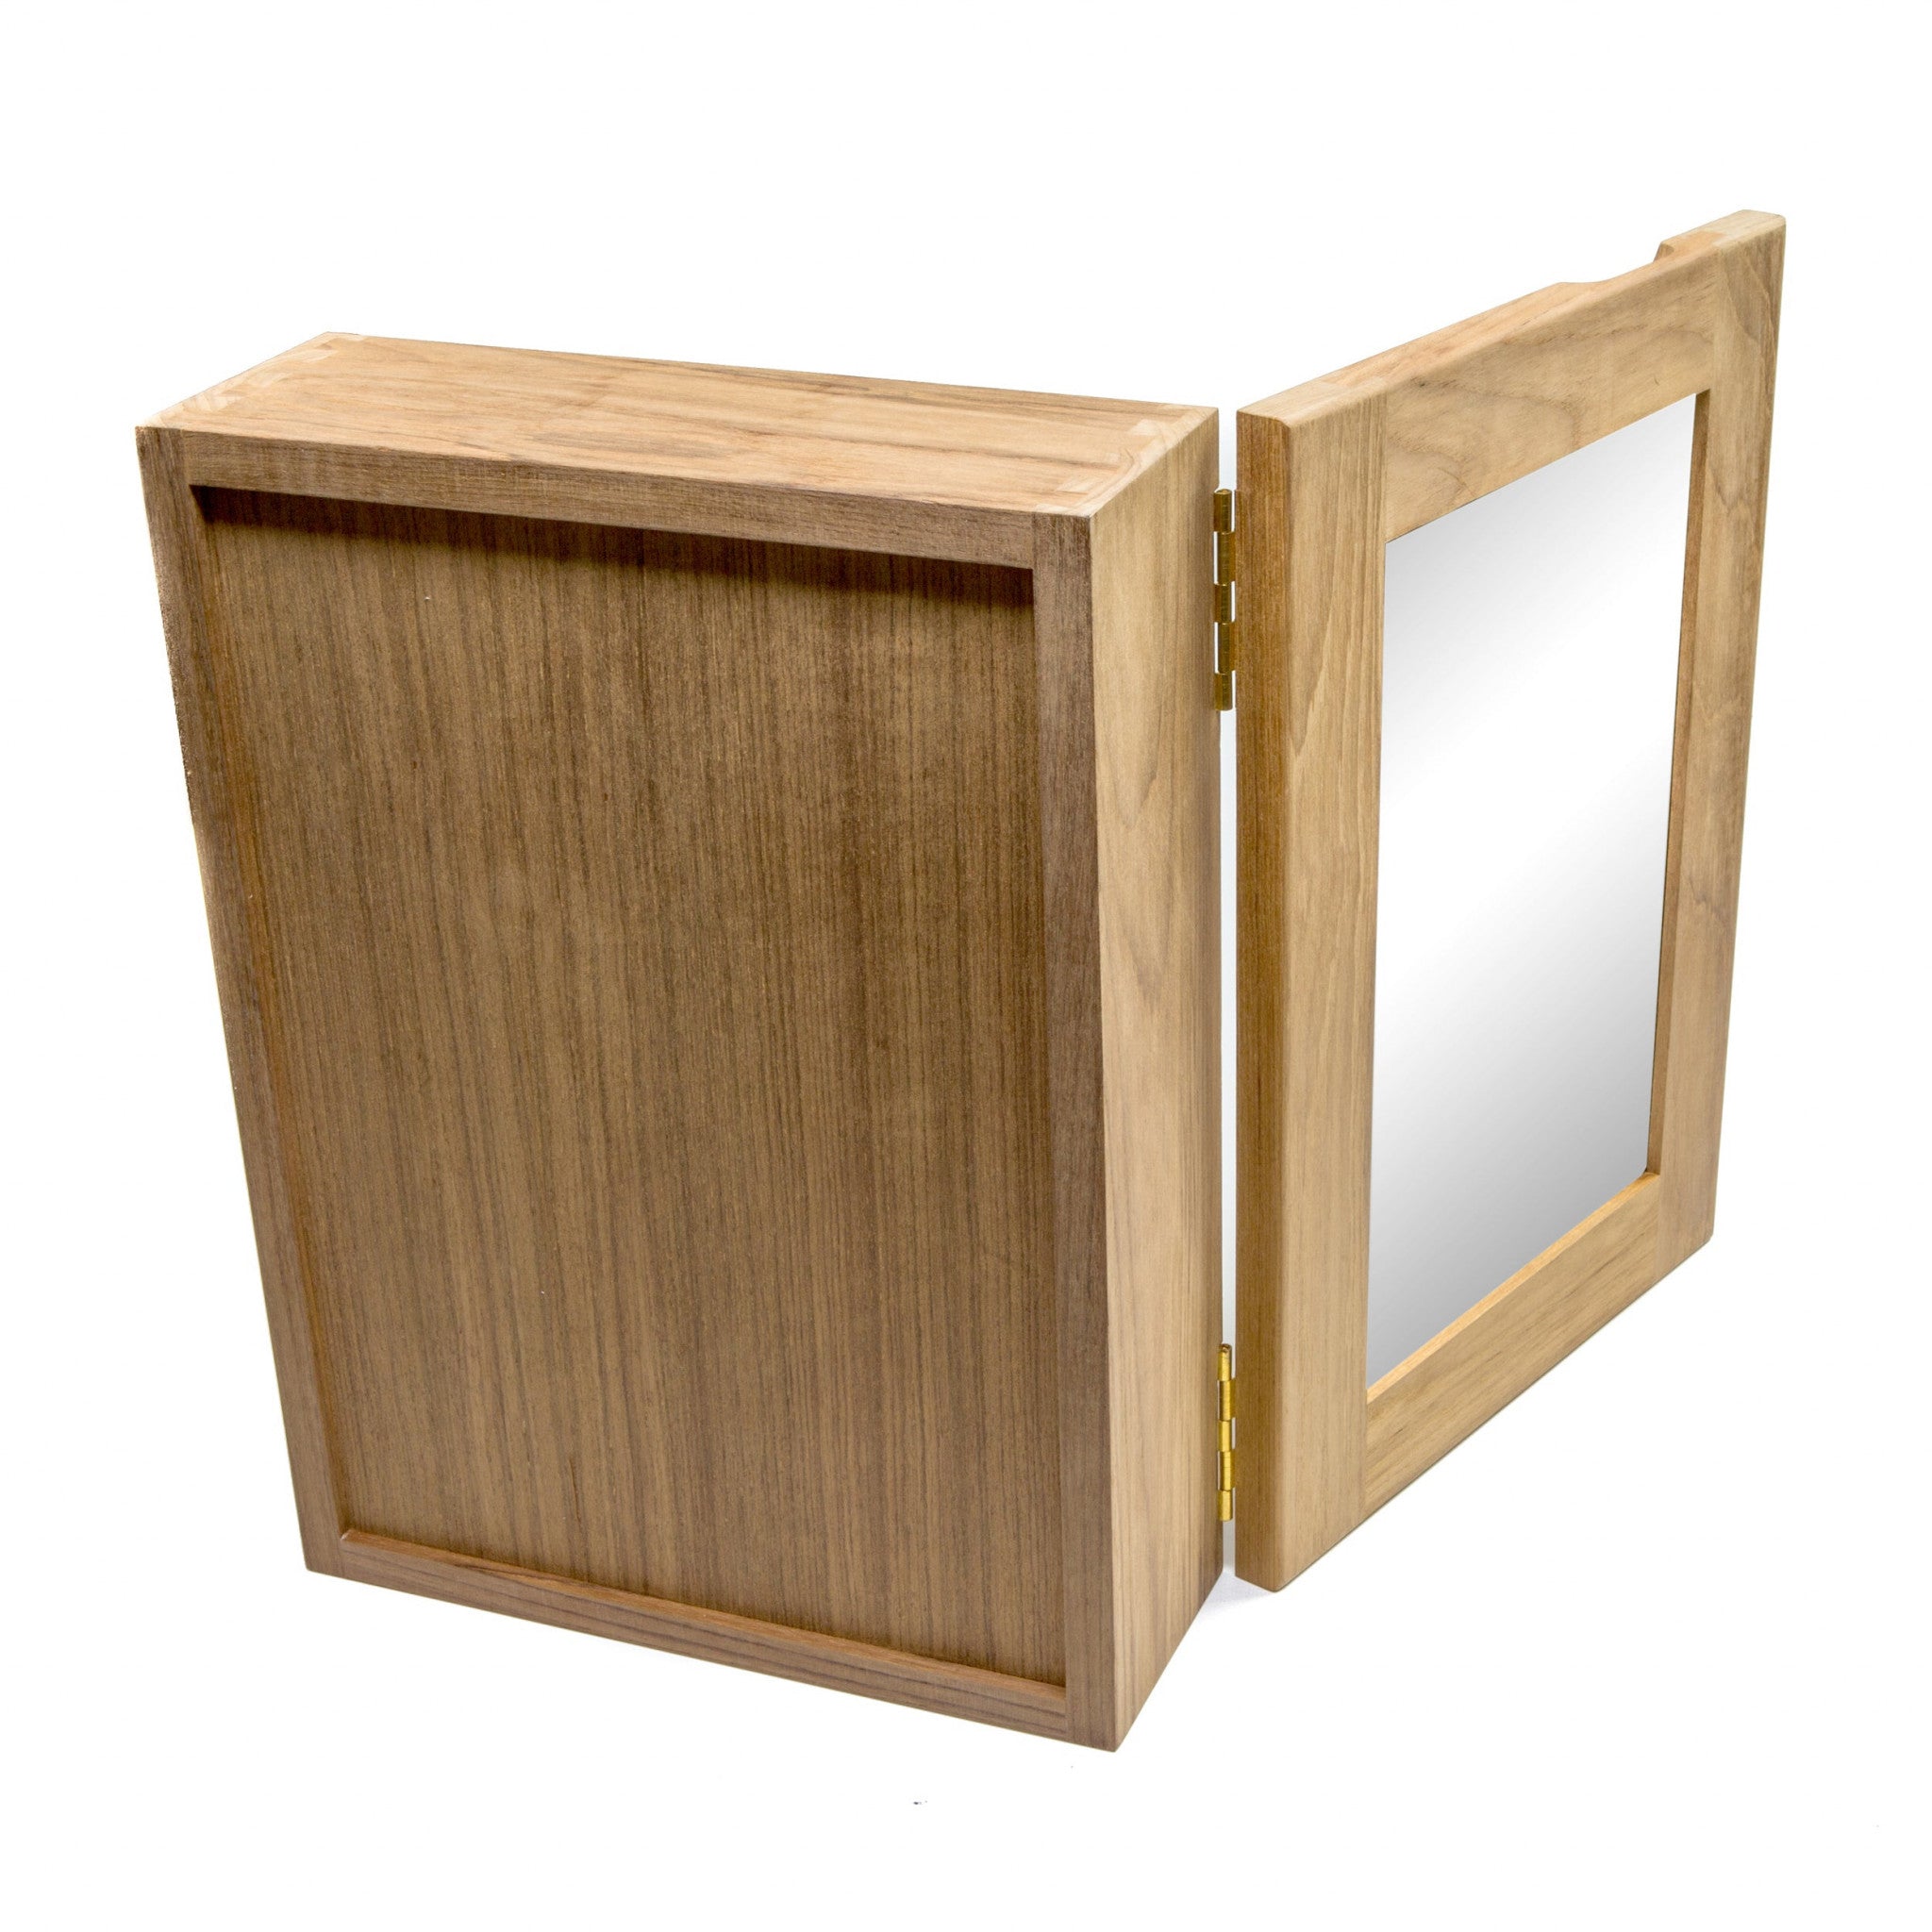 Traditional Solid Teak Hanging Mirrored Medicine Cabinet